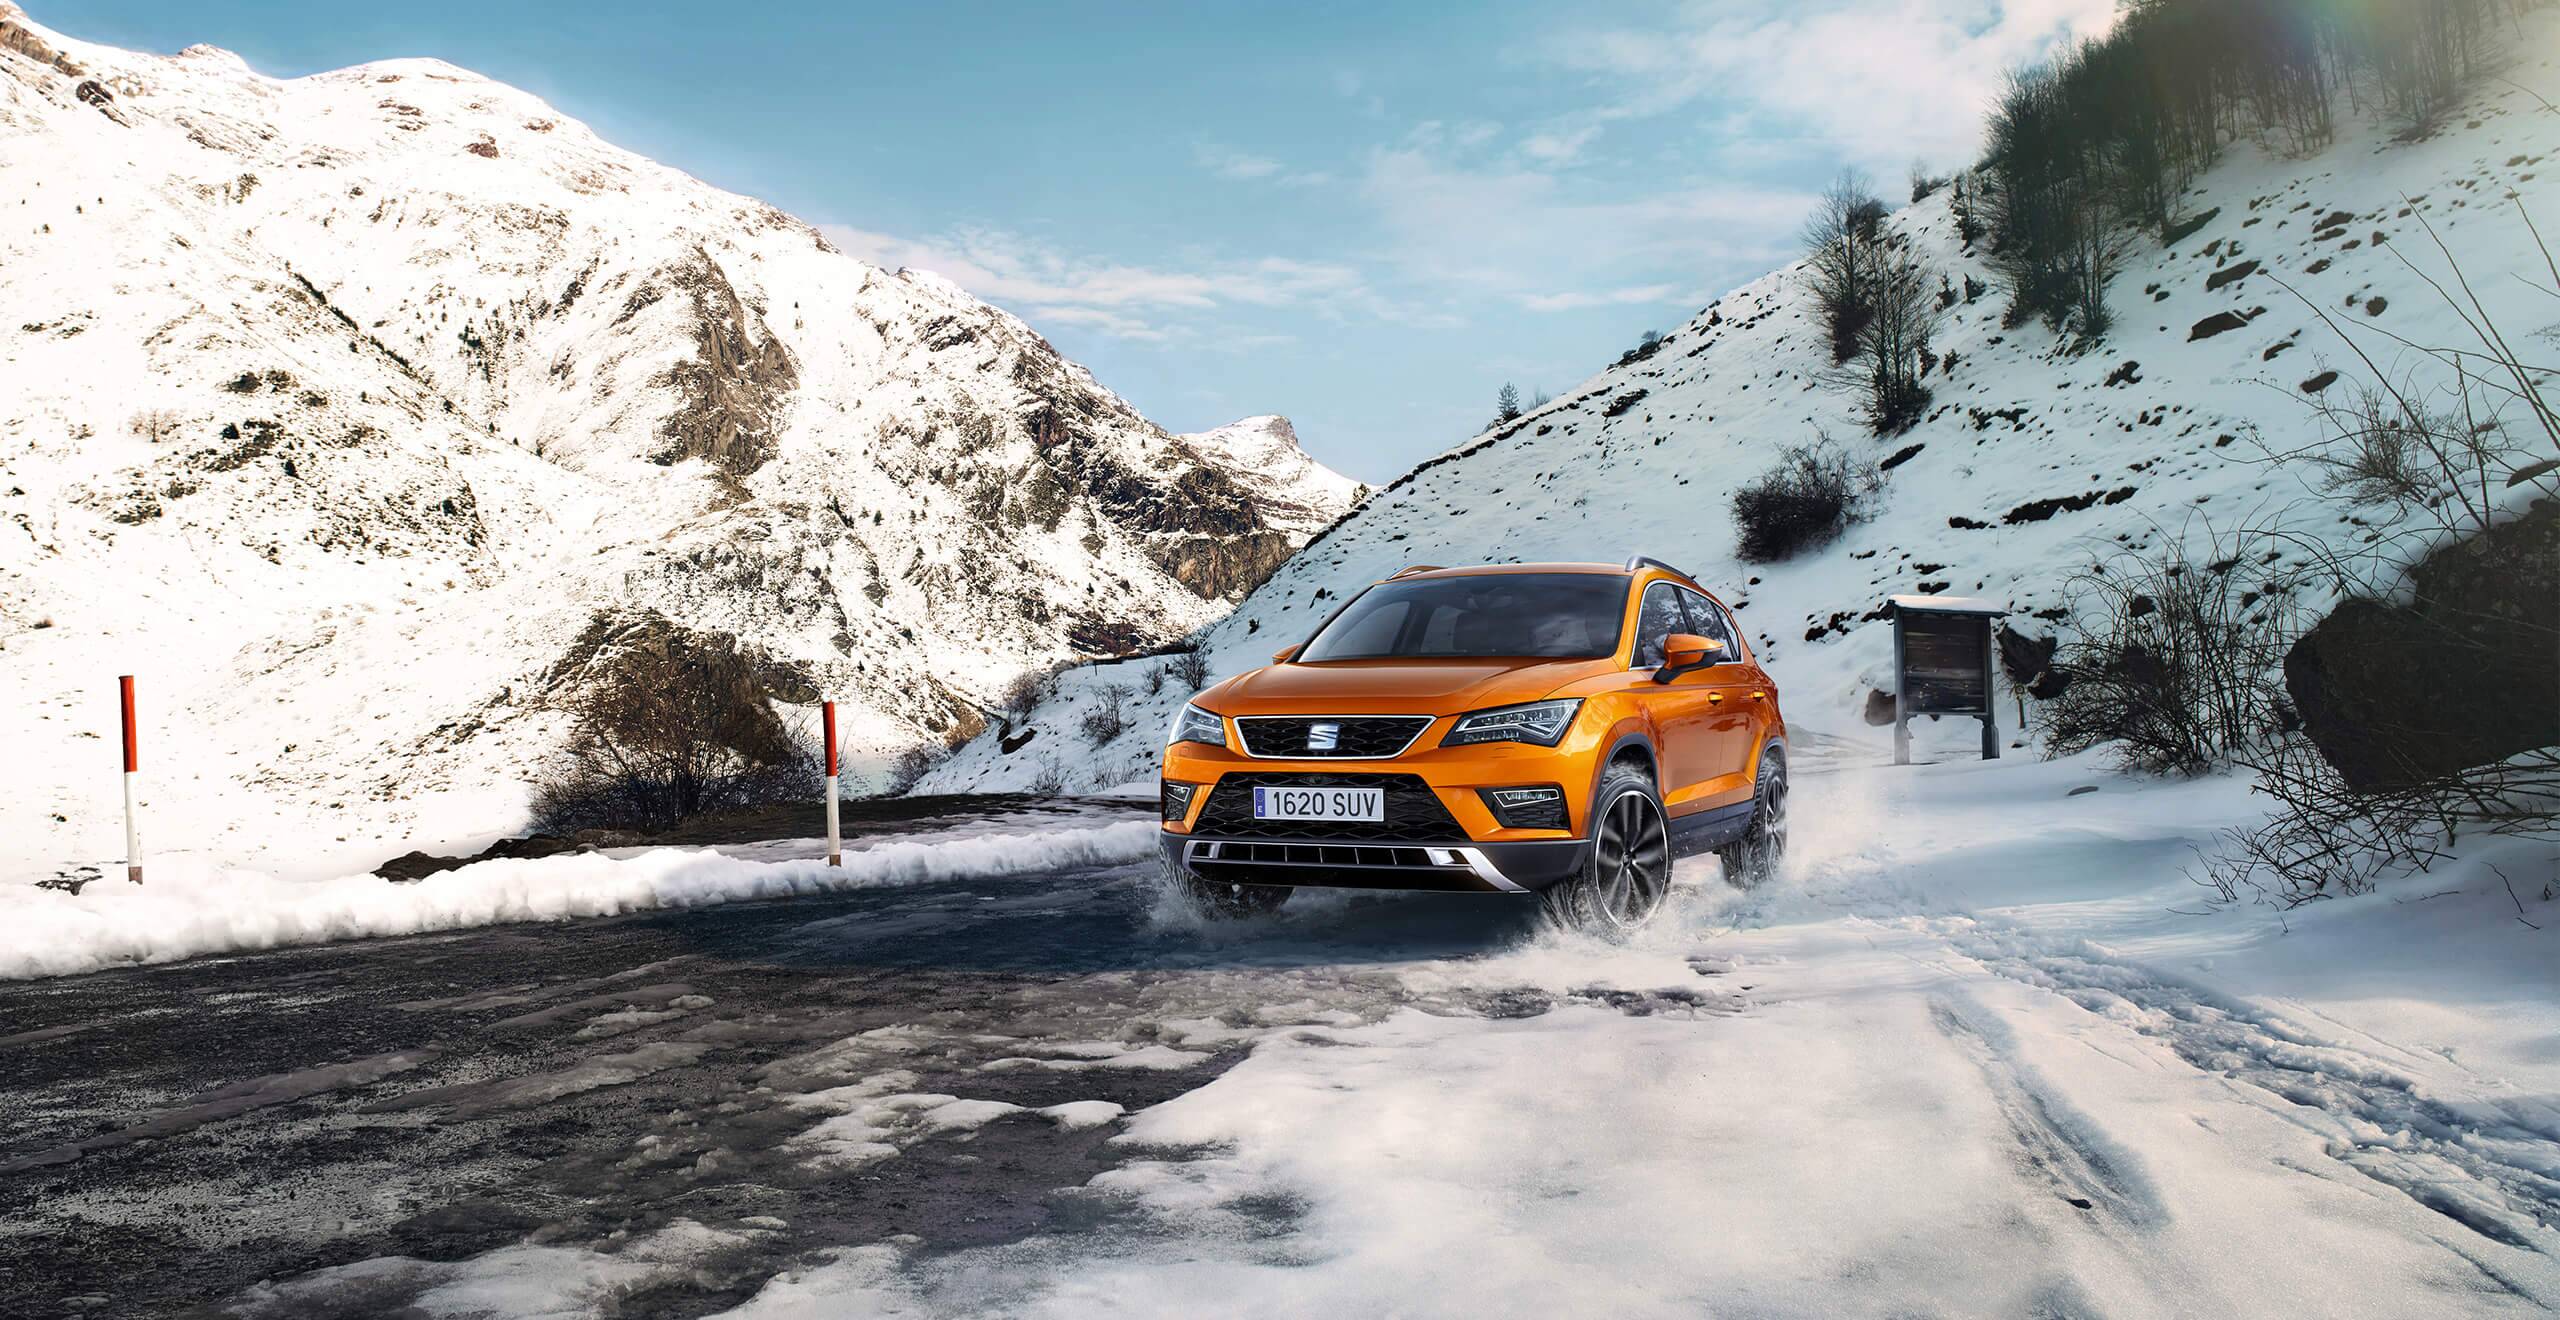 SEAT new car services and maintenance – exterior front action shot of a SEAT Ateca SUV in snowy mountains